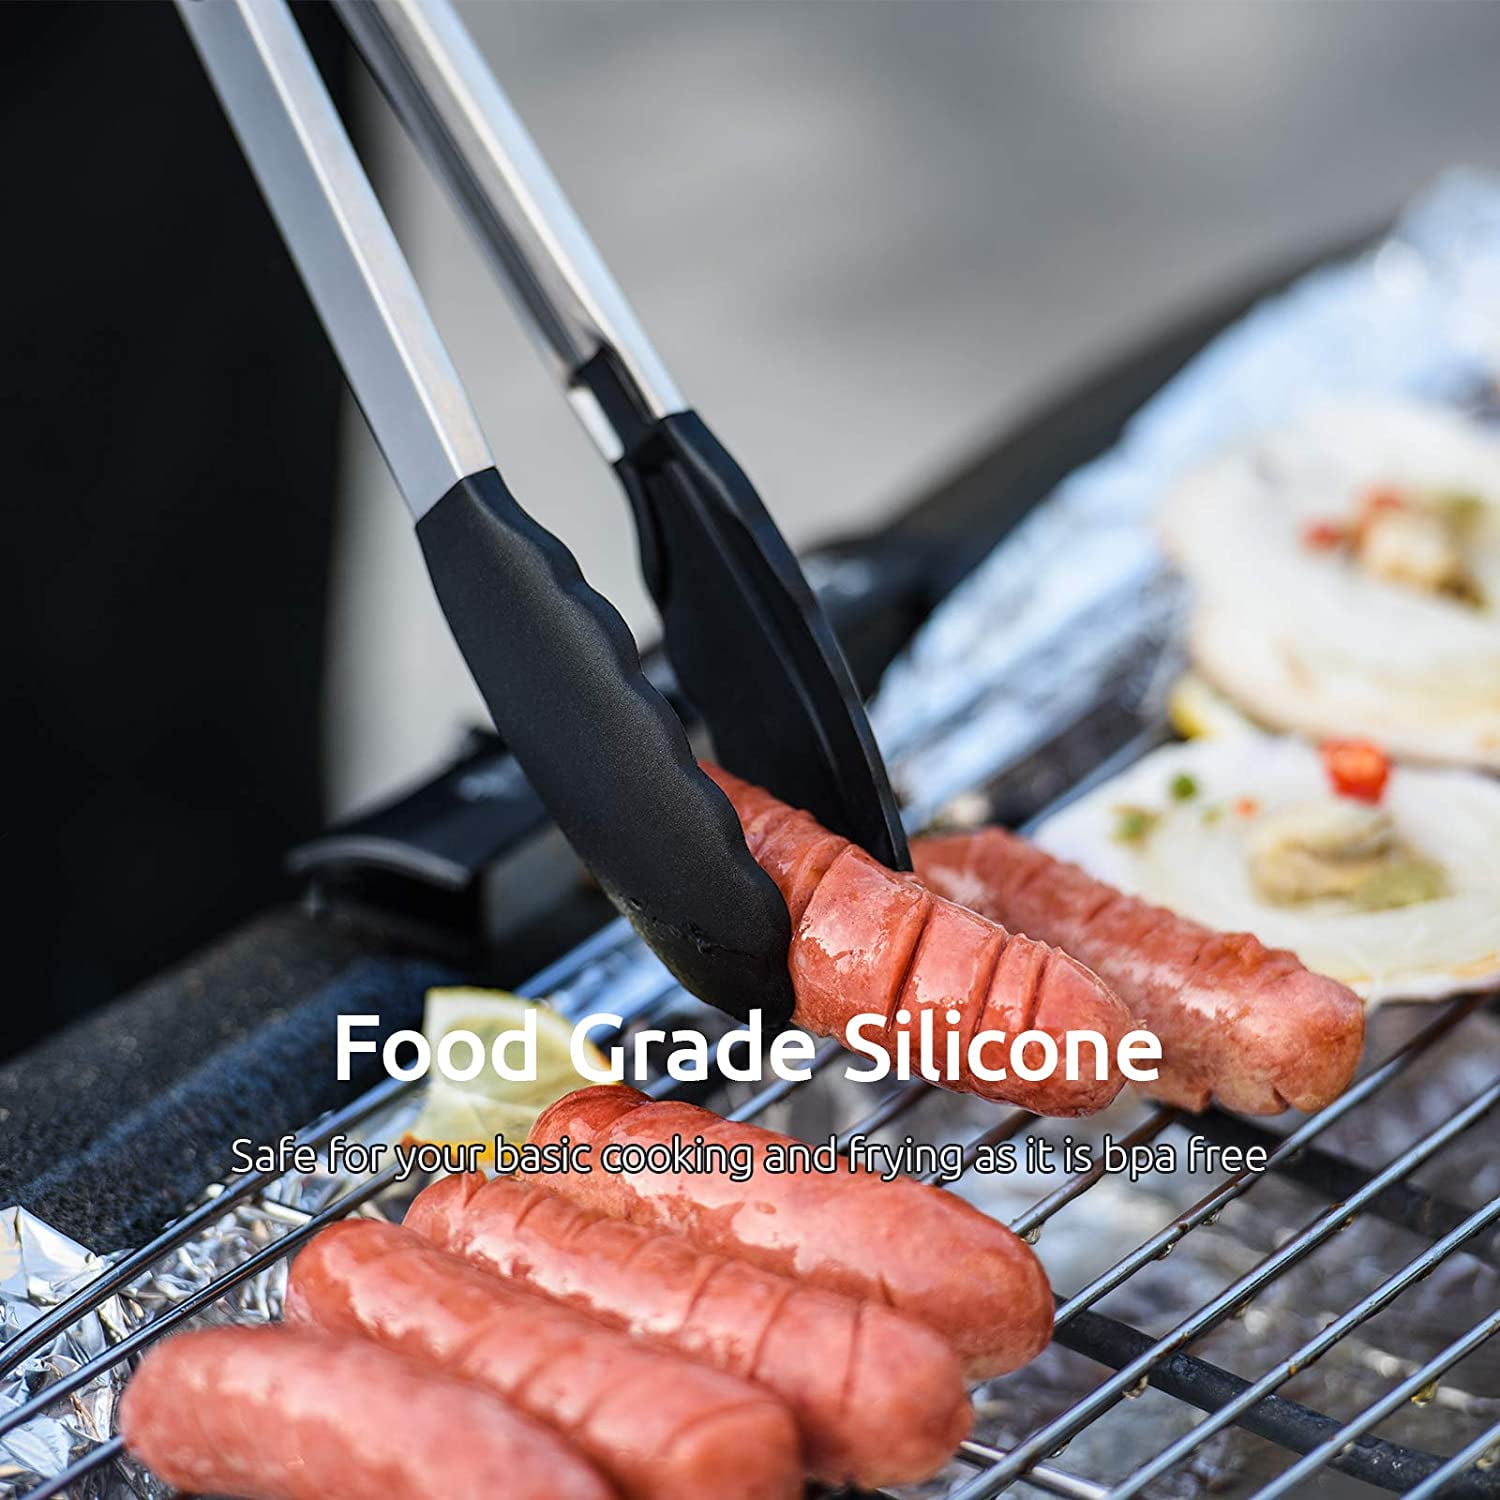 600℉ Heat Resistant Kitchen Tongs: U-Taste 7/9/12 inch Silicone Cooking  Tong Set with Non Stick Rubber Tips and Silicon Coated 18/8 Stainless Steel